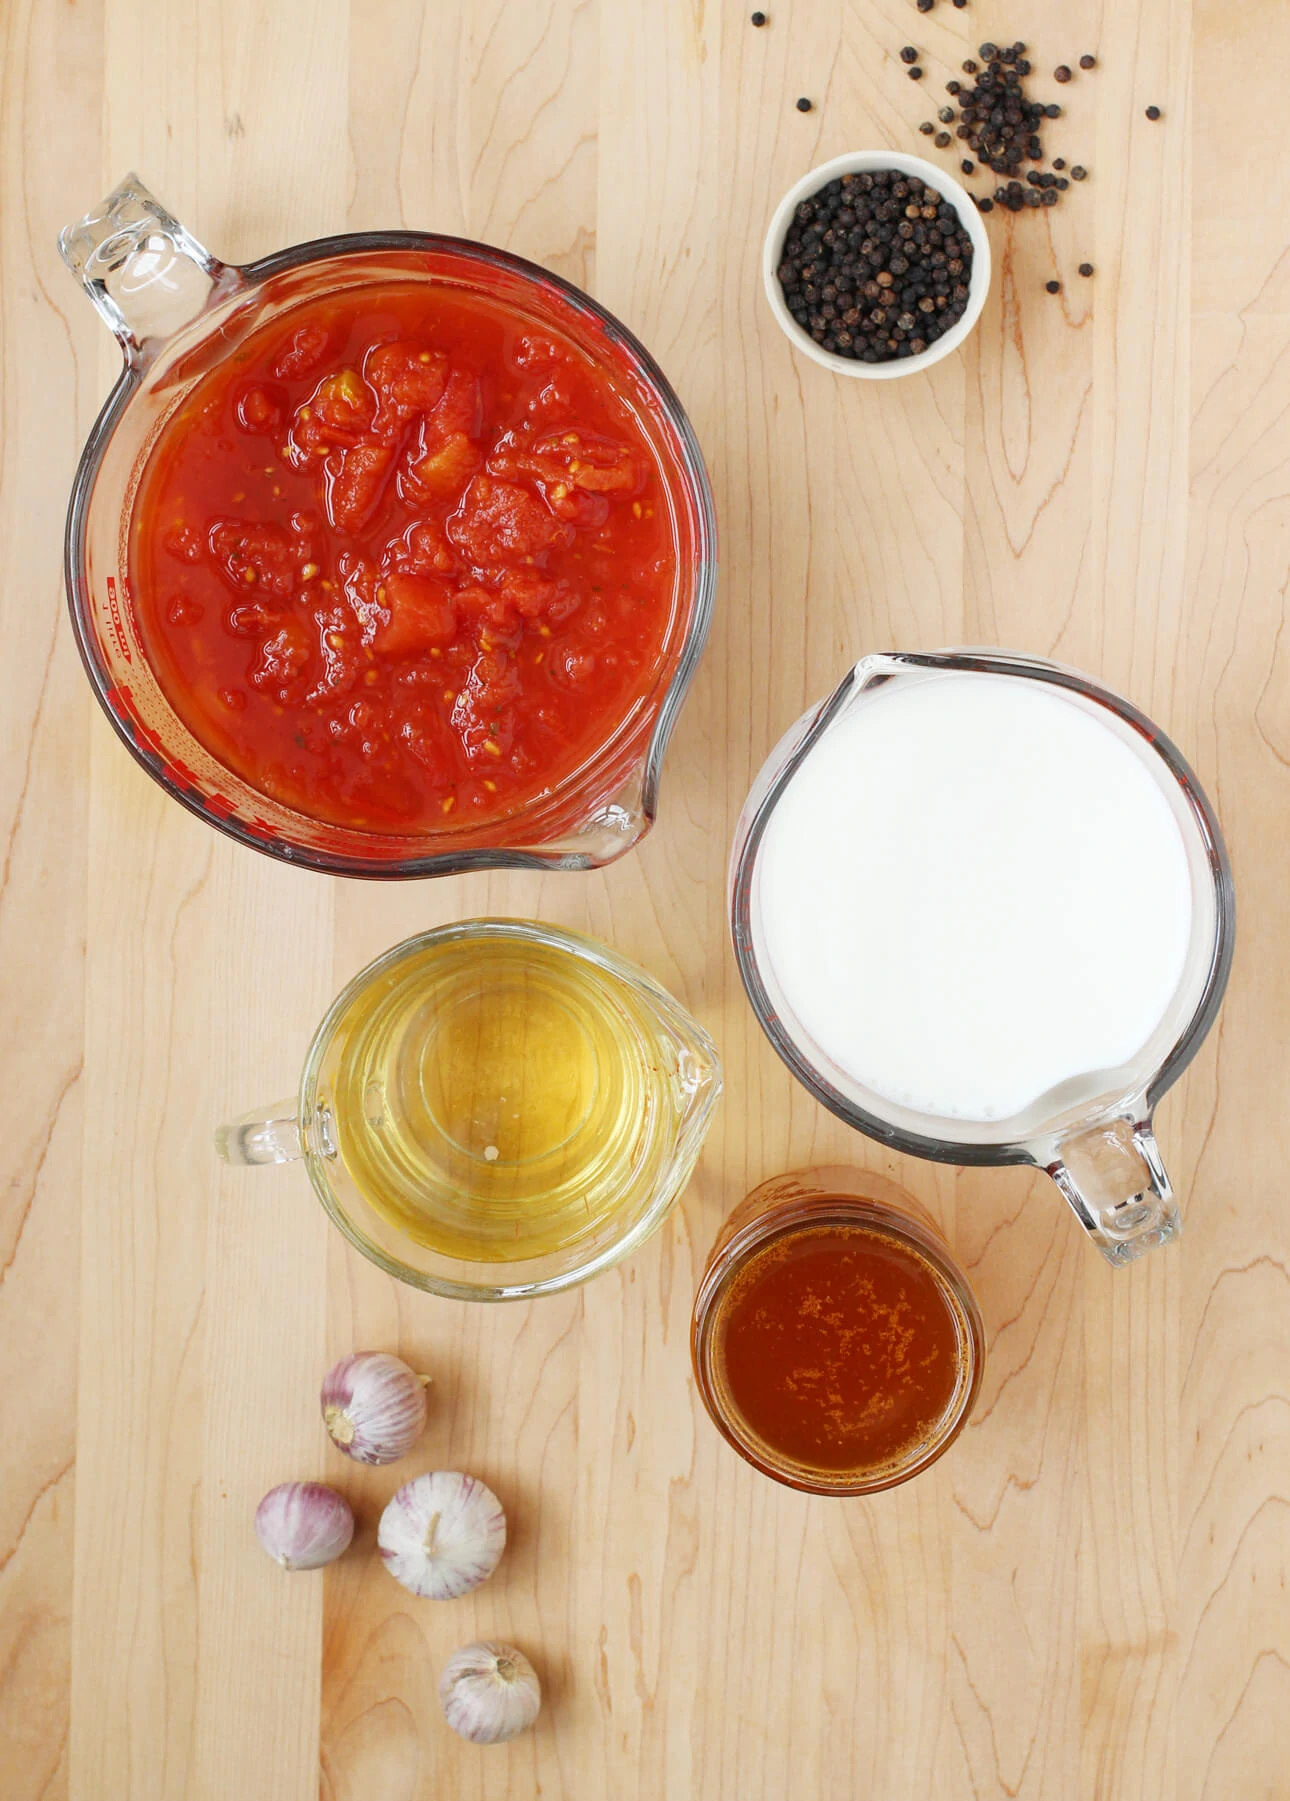 Ingredients to make Bolognese Sauce / How to Make an Authentic Bolognese Sauce / FoodNouveau.com